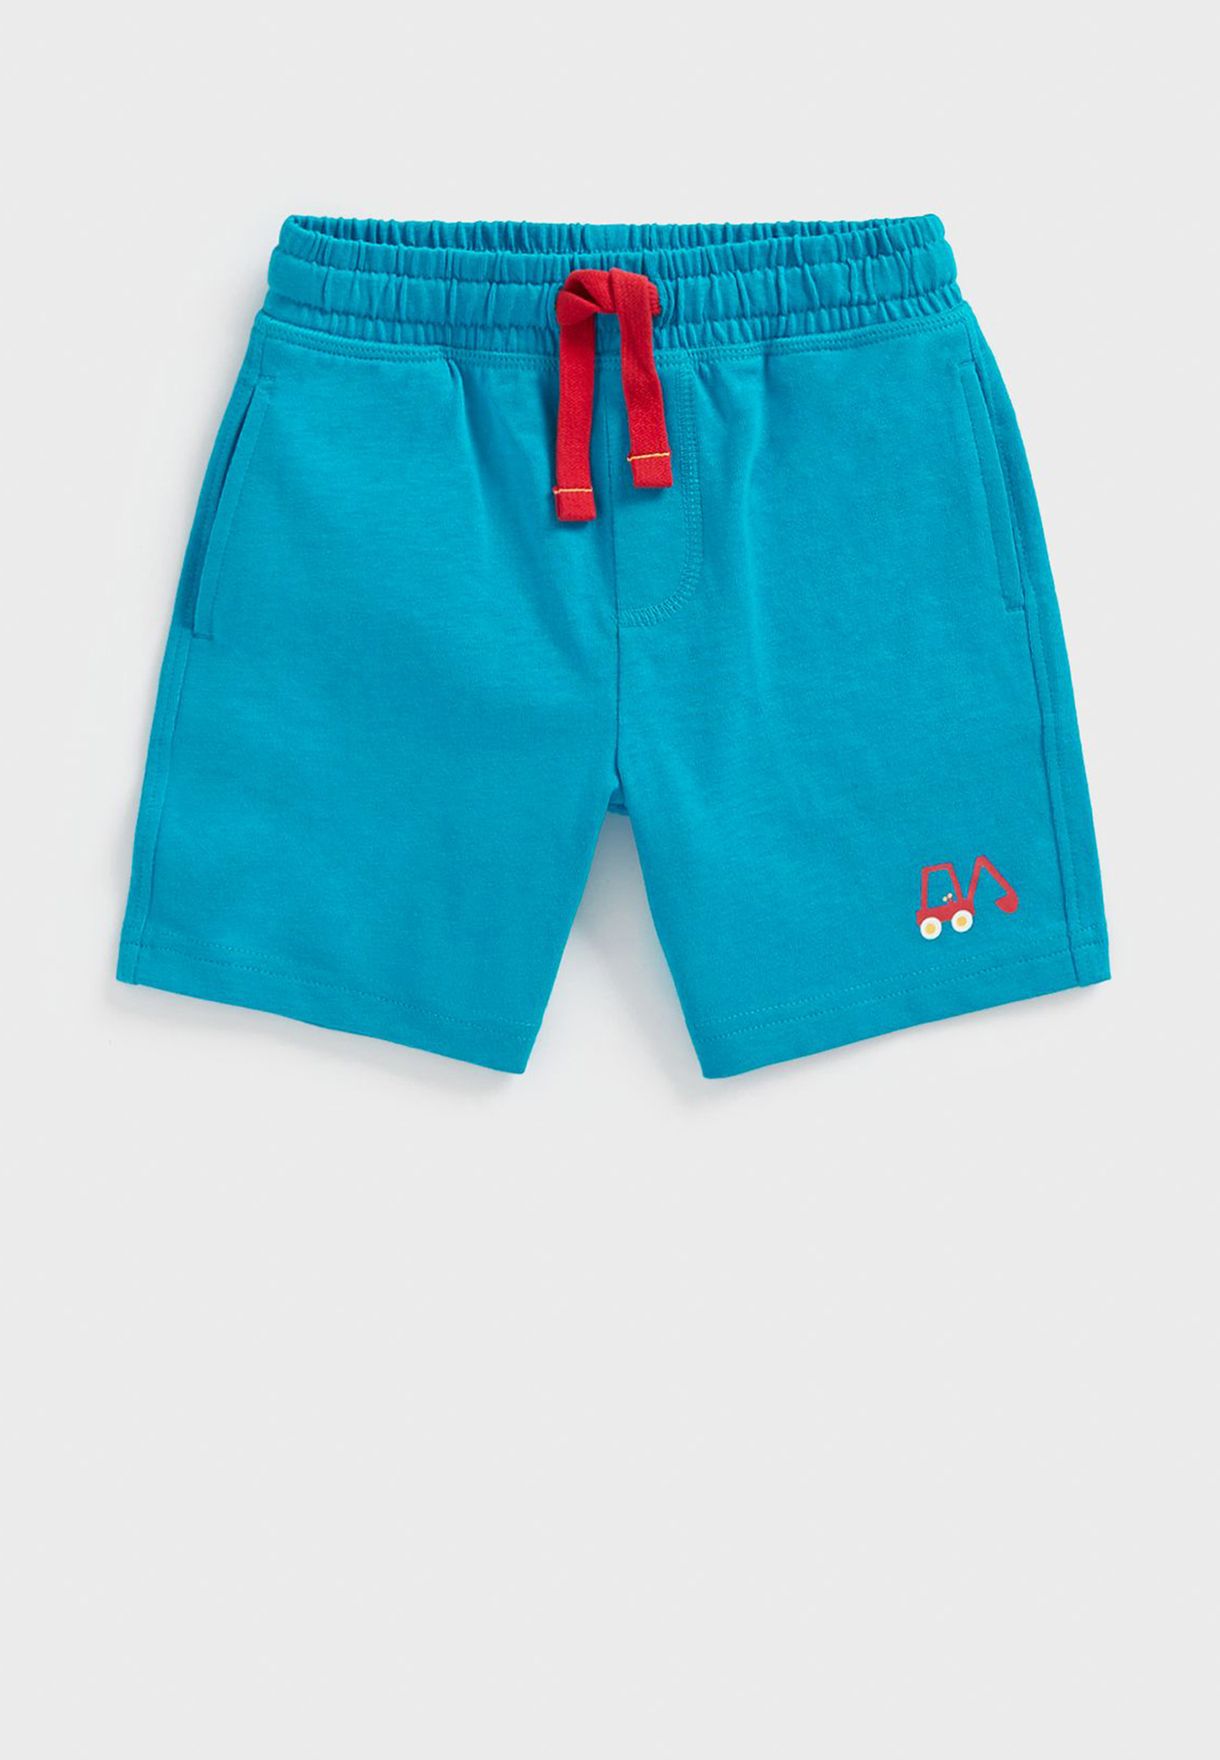 Kids 3 Pack Assorted Shorts